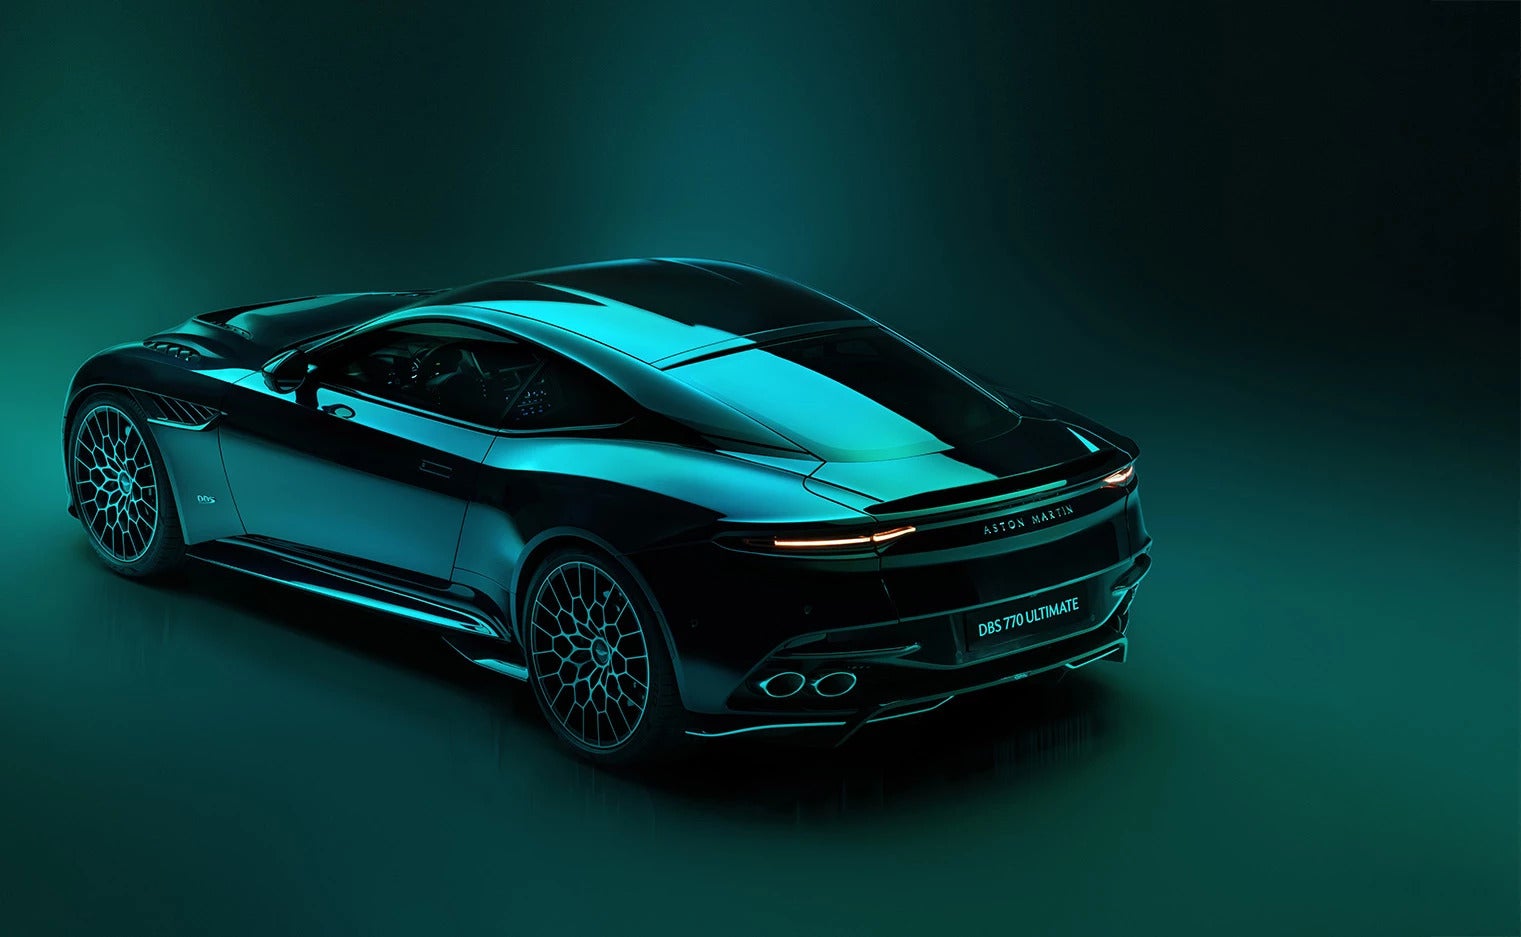 View the new Aston Martin DBS 770 Ultimate